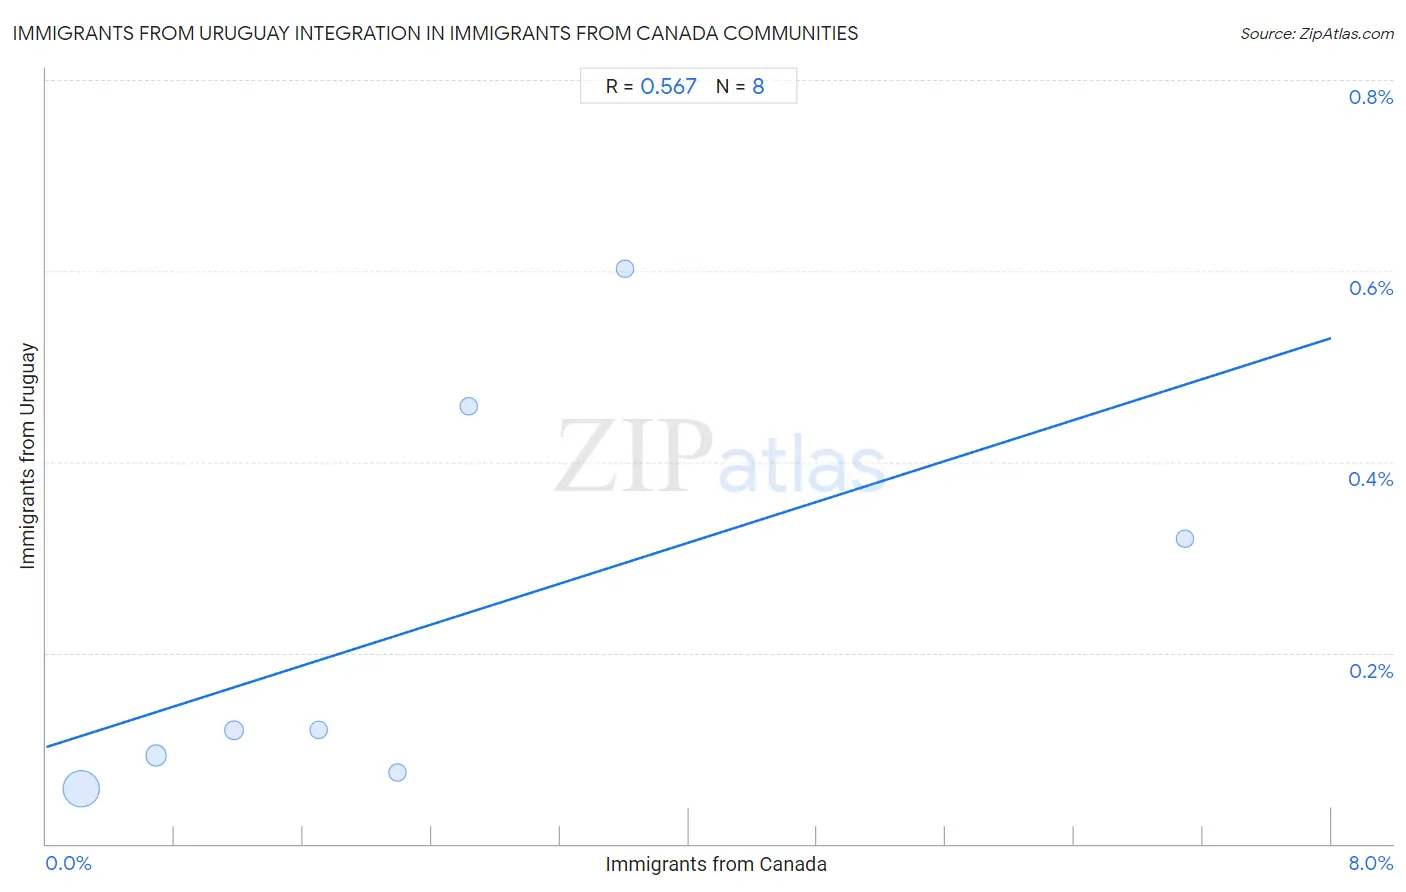 Immigrants from Canada Integration in Immigrants from Uruguay Communities